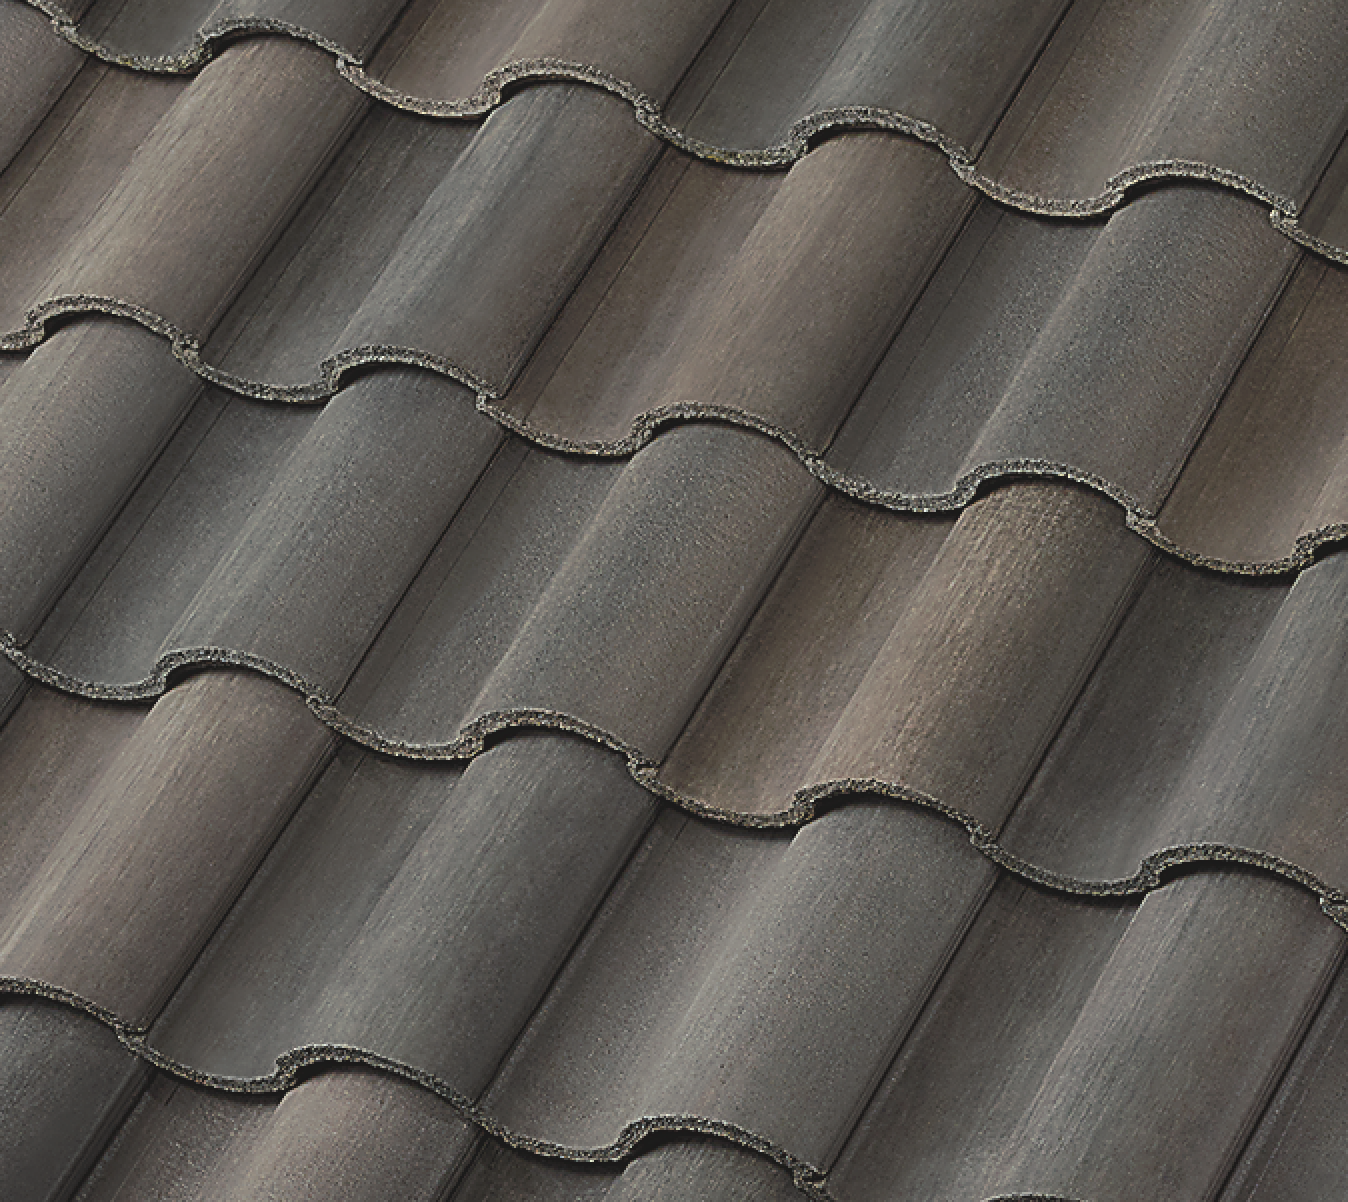 Concrete Roofing Tiles Available in Five New Colors - Roofing